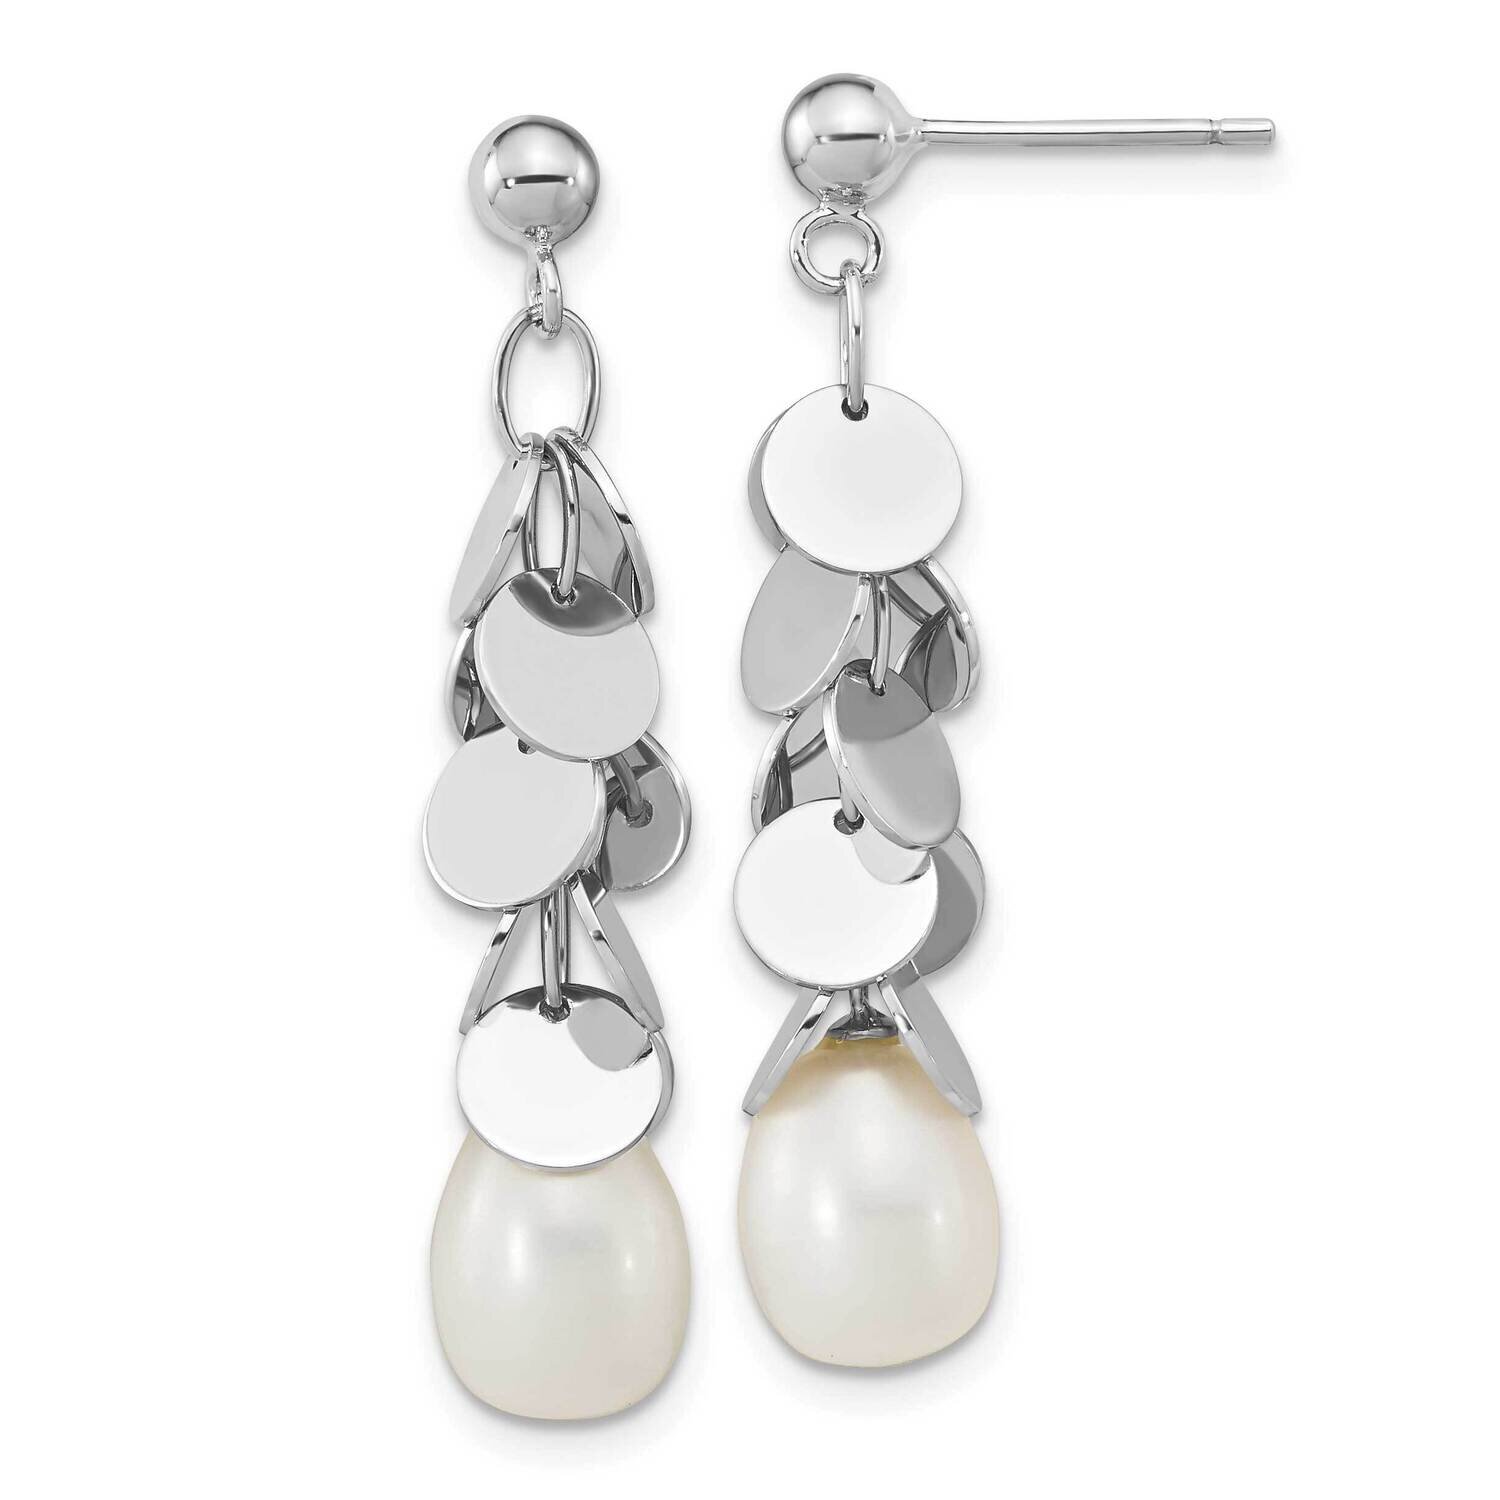 7-9mm Rice Fwc Pearl Post Dangle Earrings Sterling Silver Rhodium-Plated QE16349